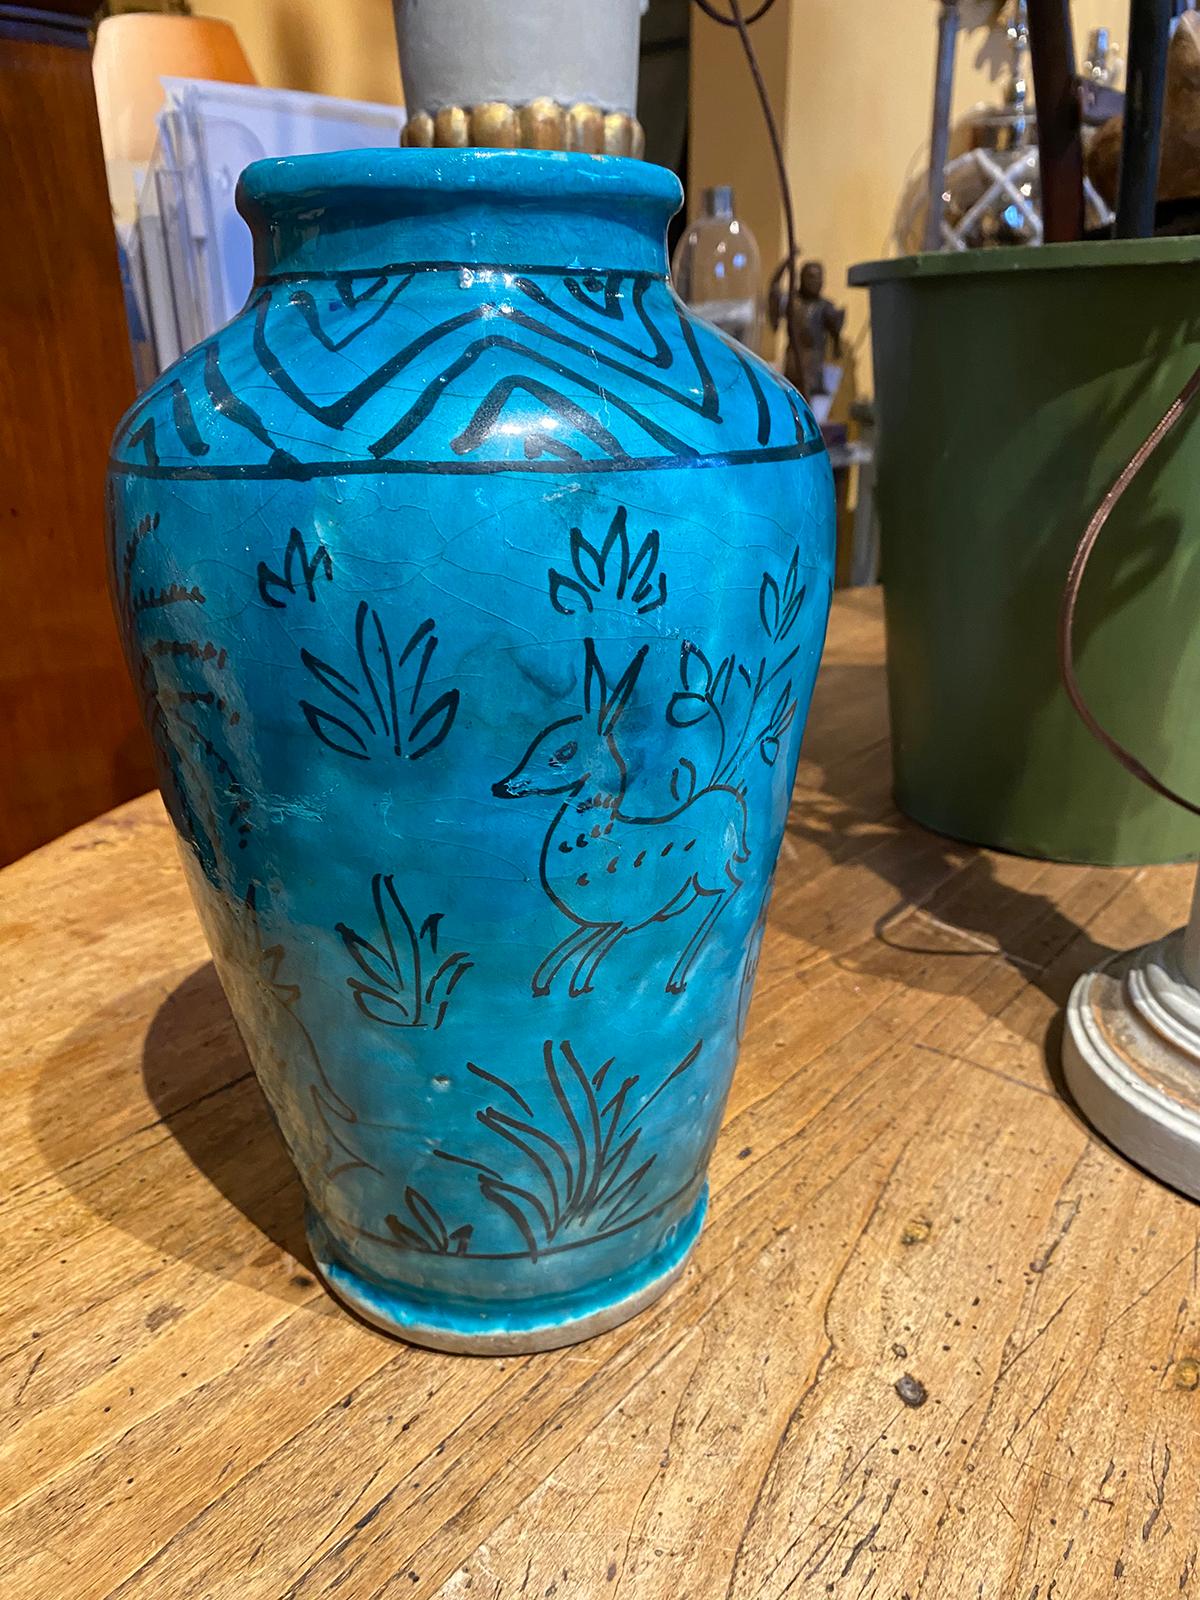 19th-20th Persian Century Blue Glazed Pottery Jar/Vase with Does 1